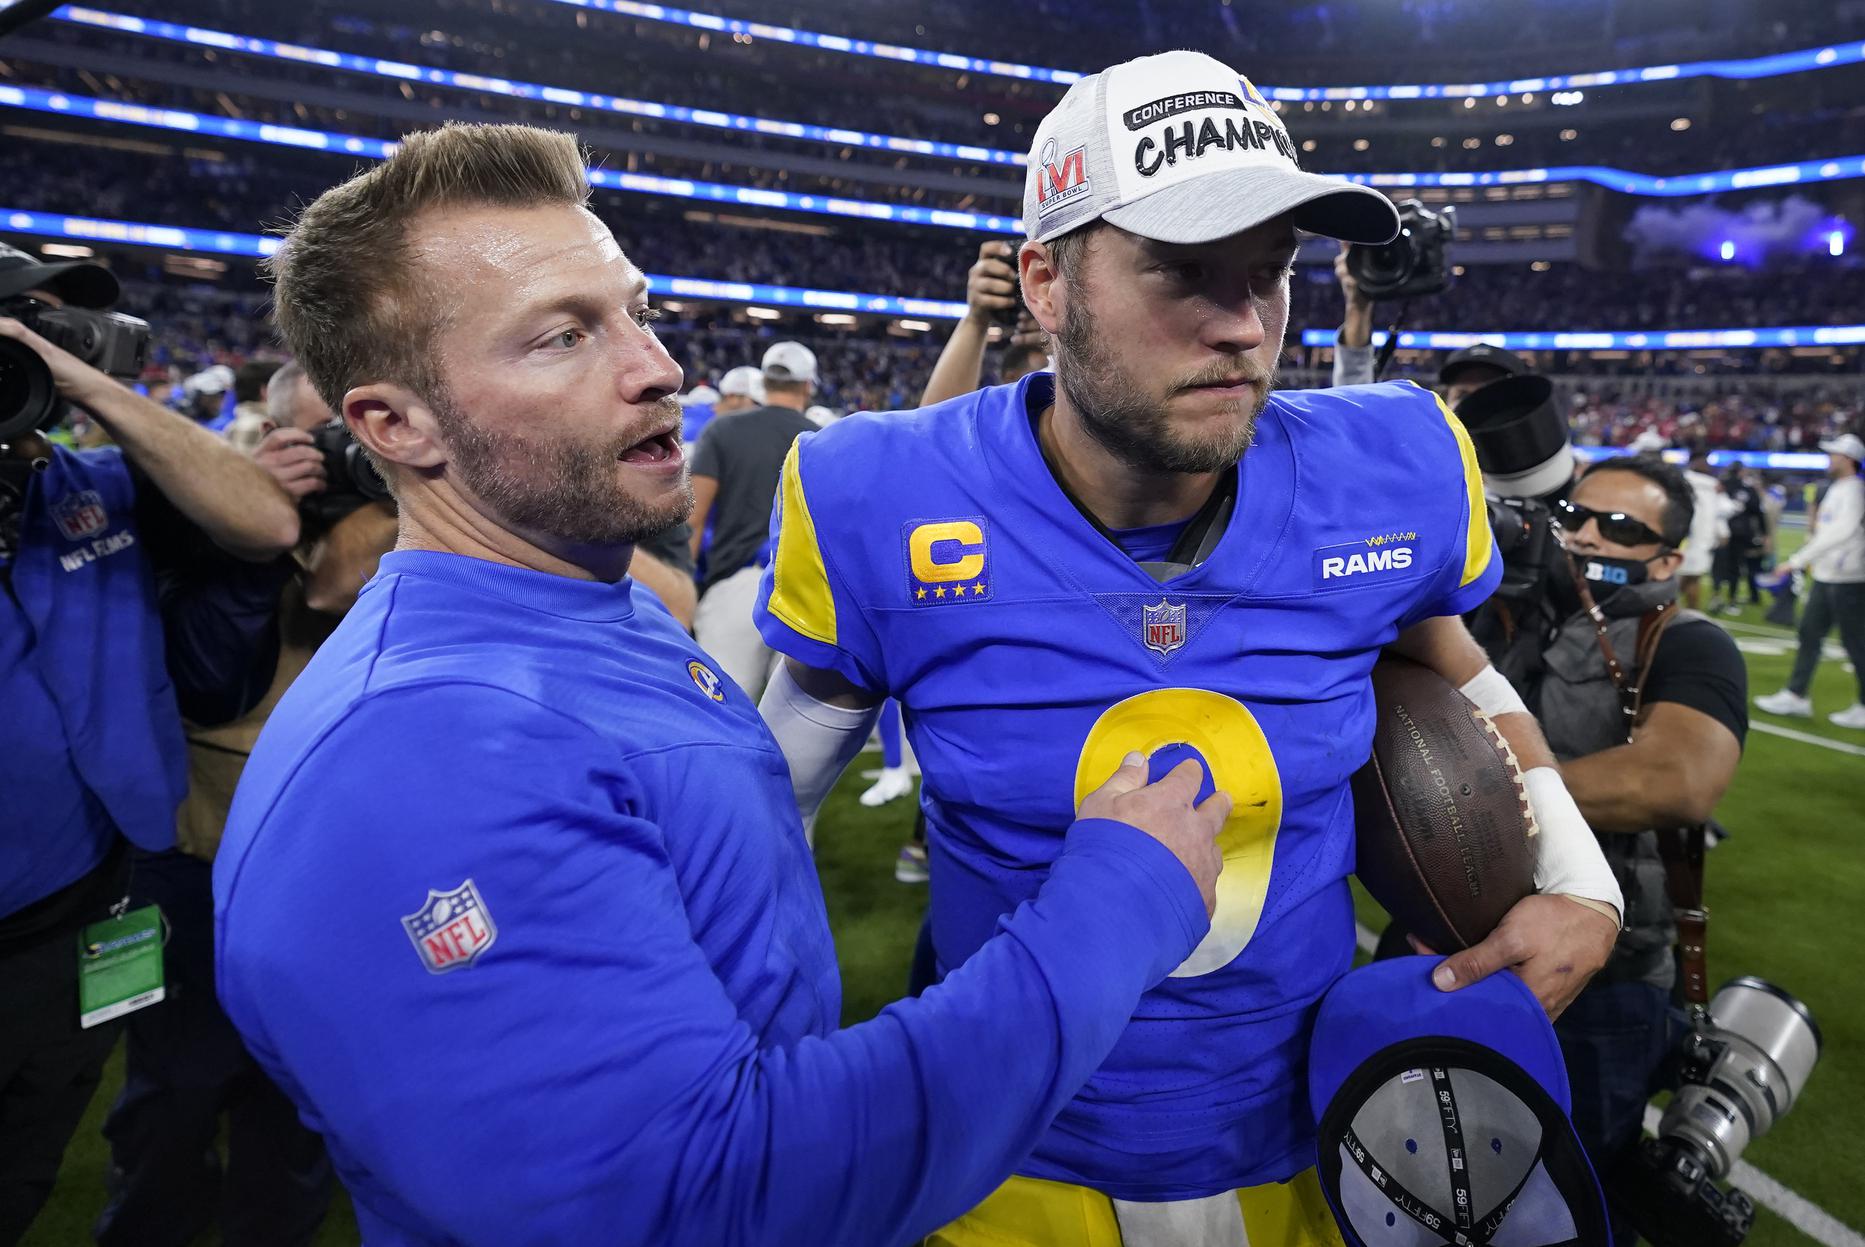 Joe Burrow and Matthew Stafford took different paths to Super Bowl